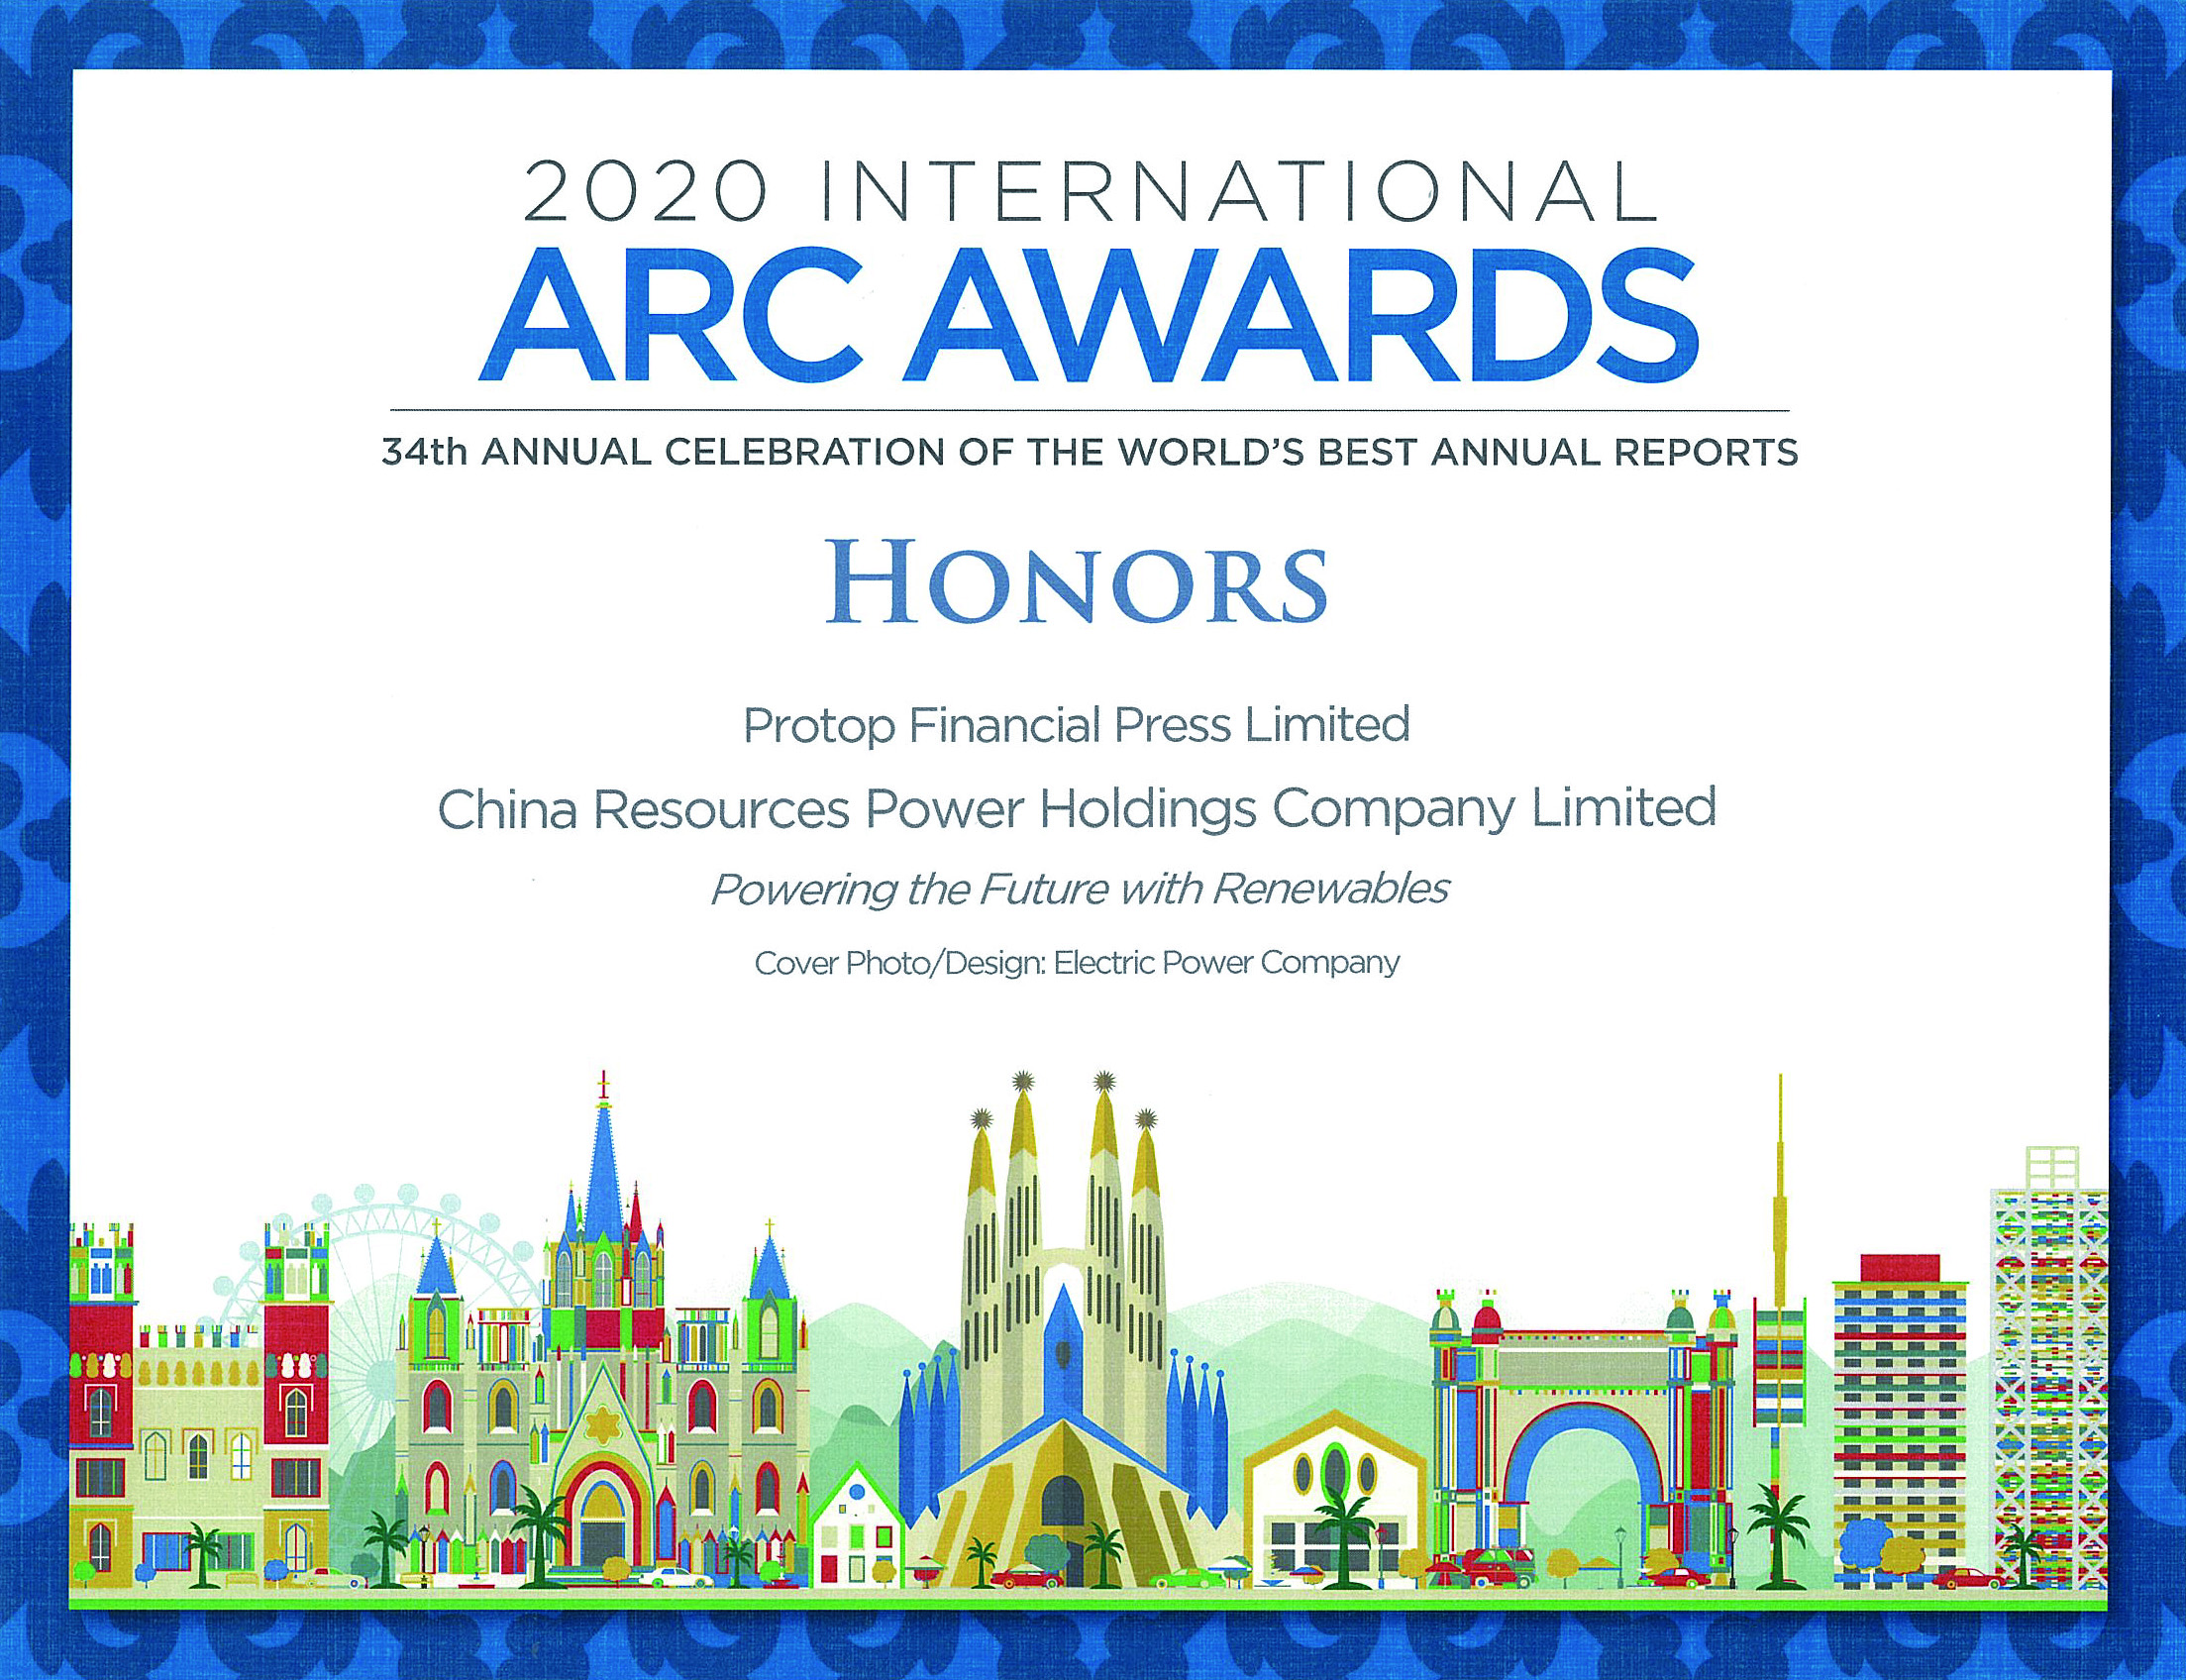 China Resources Power Holdings Company Limited 2020 Honors Award